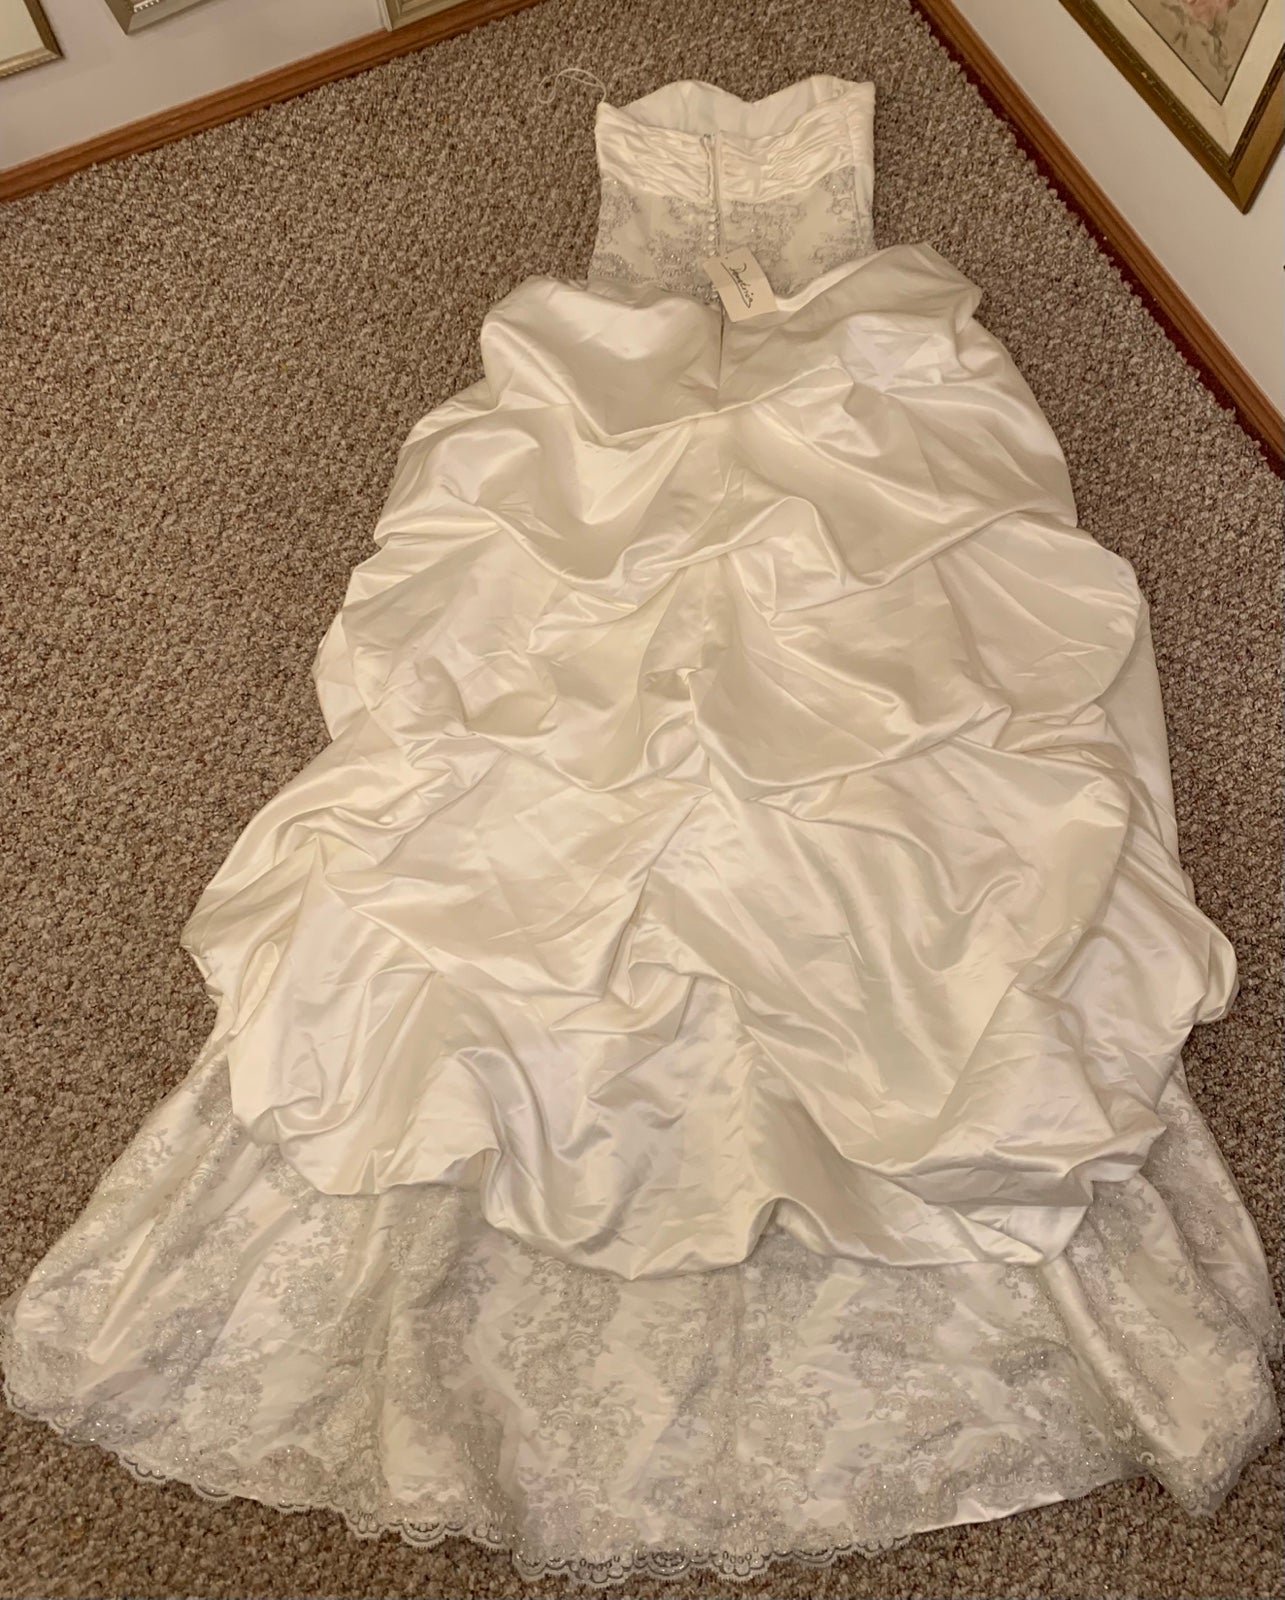 large discount NWT ivory strapless ball gown wedding dress IeiME7IsO for sale